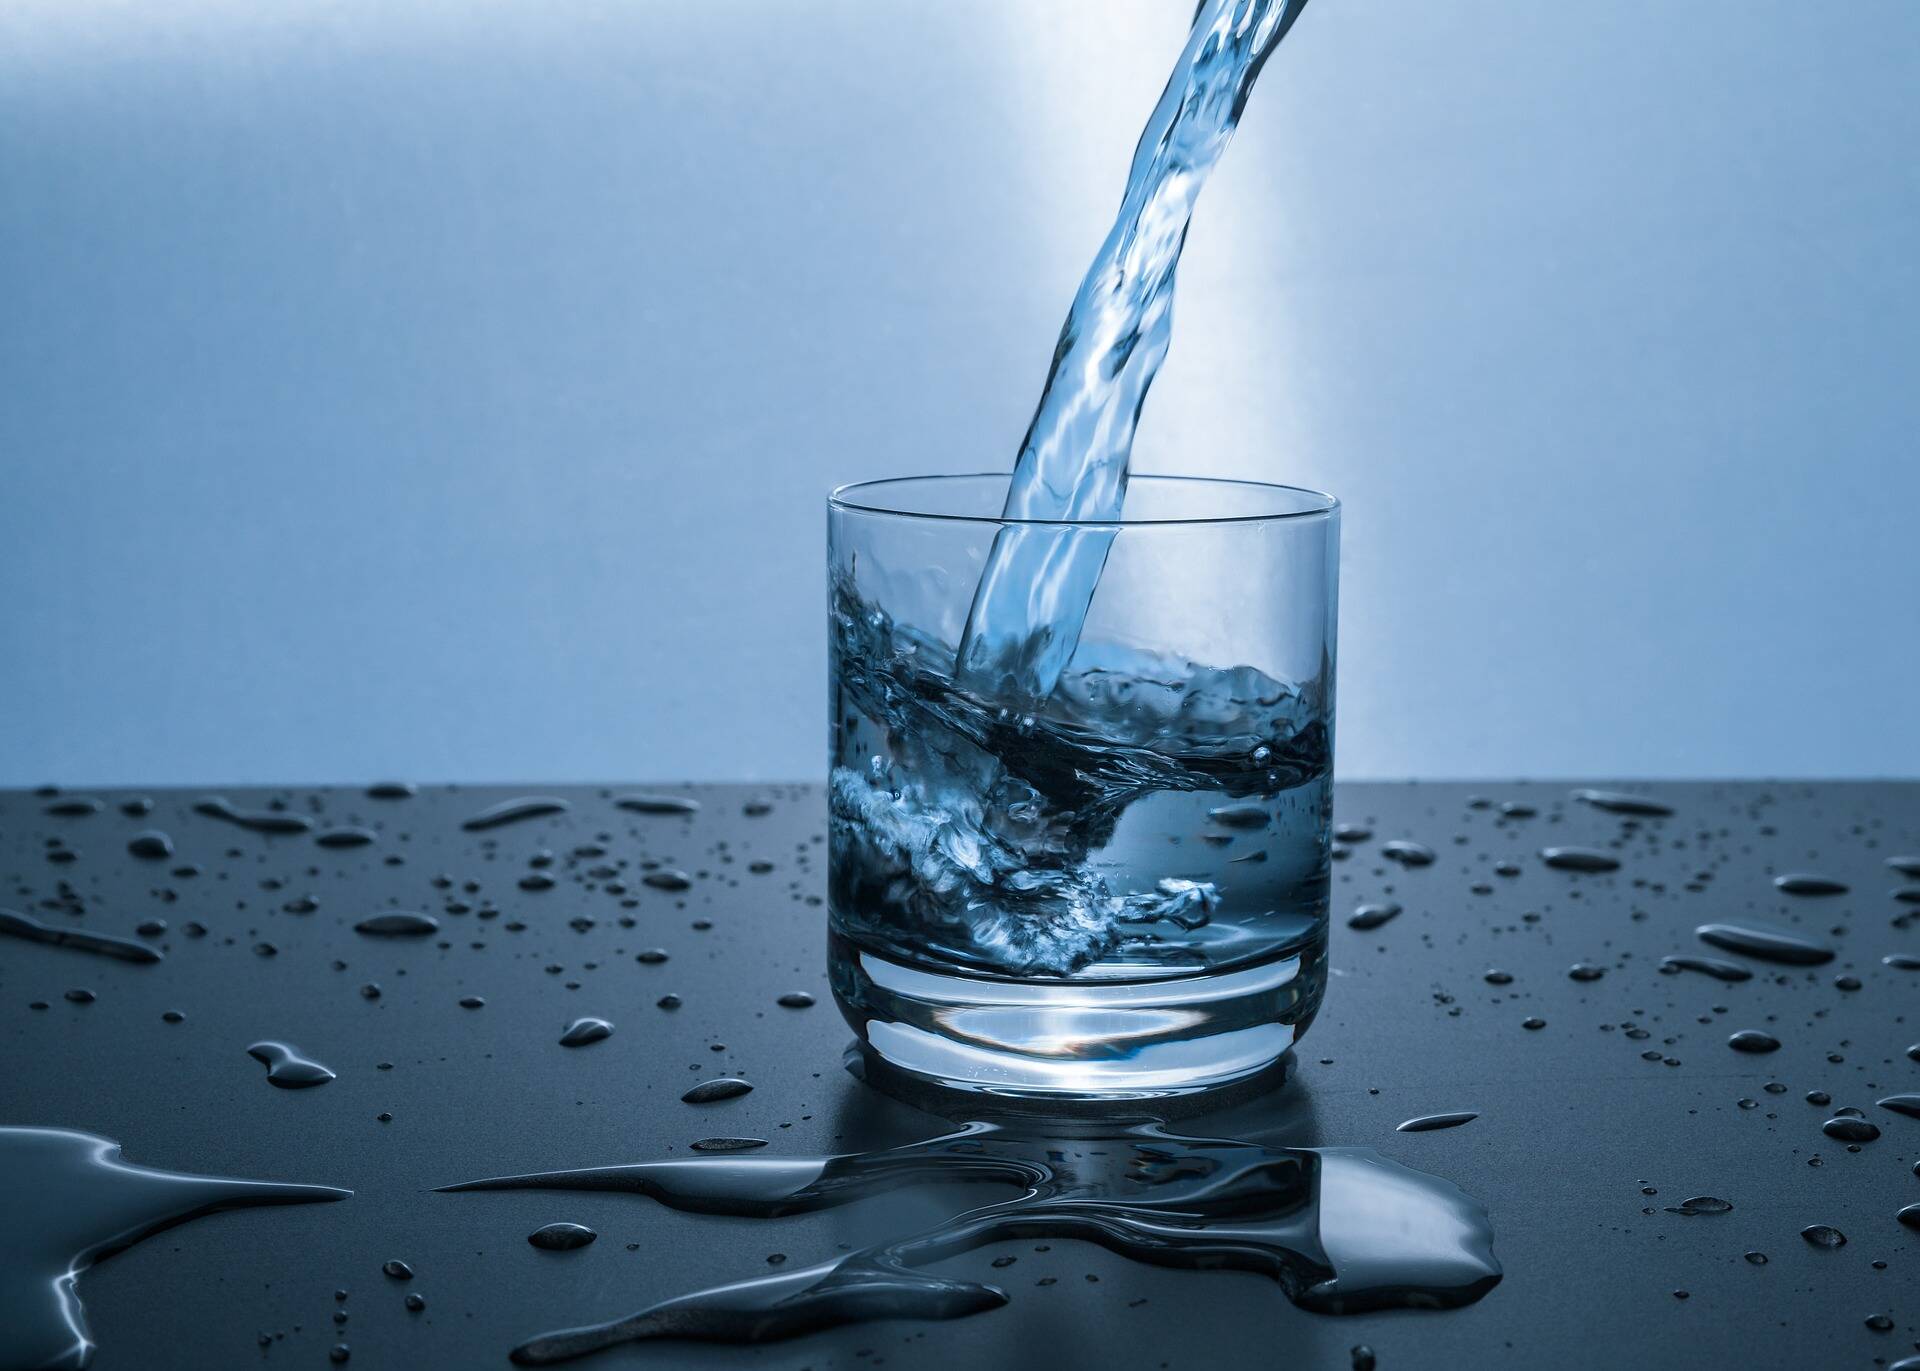 A glass half full? The outlook for innovation in drinking water quality